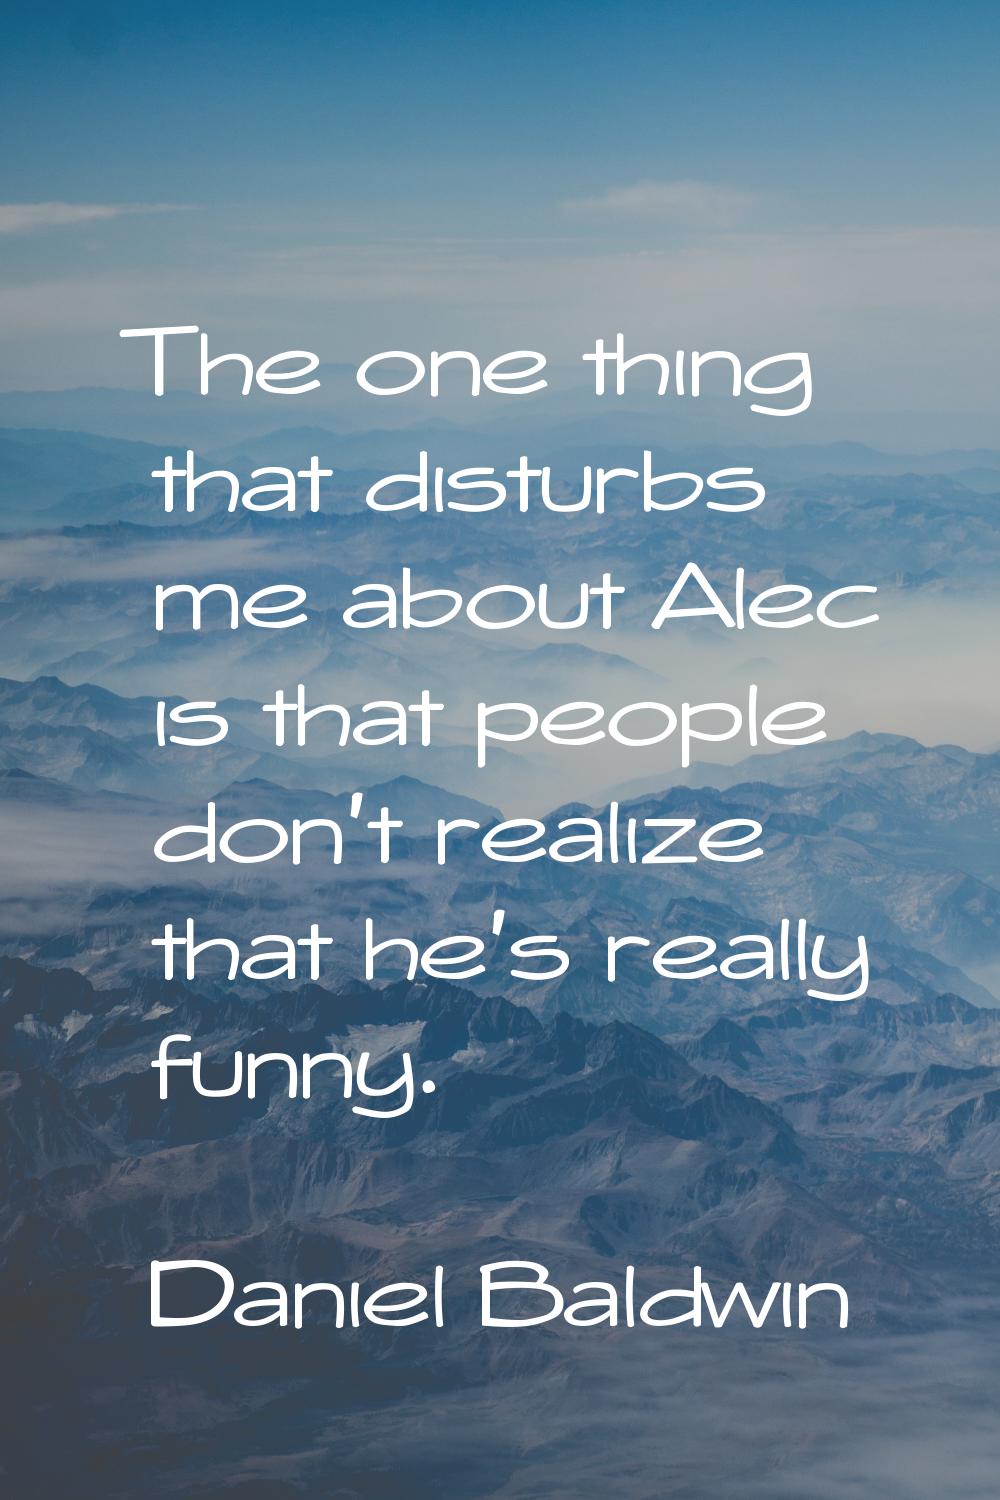 The one thing that disturbs me about Alec is that people don't realize that he's really funny.